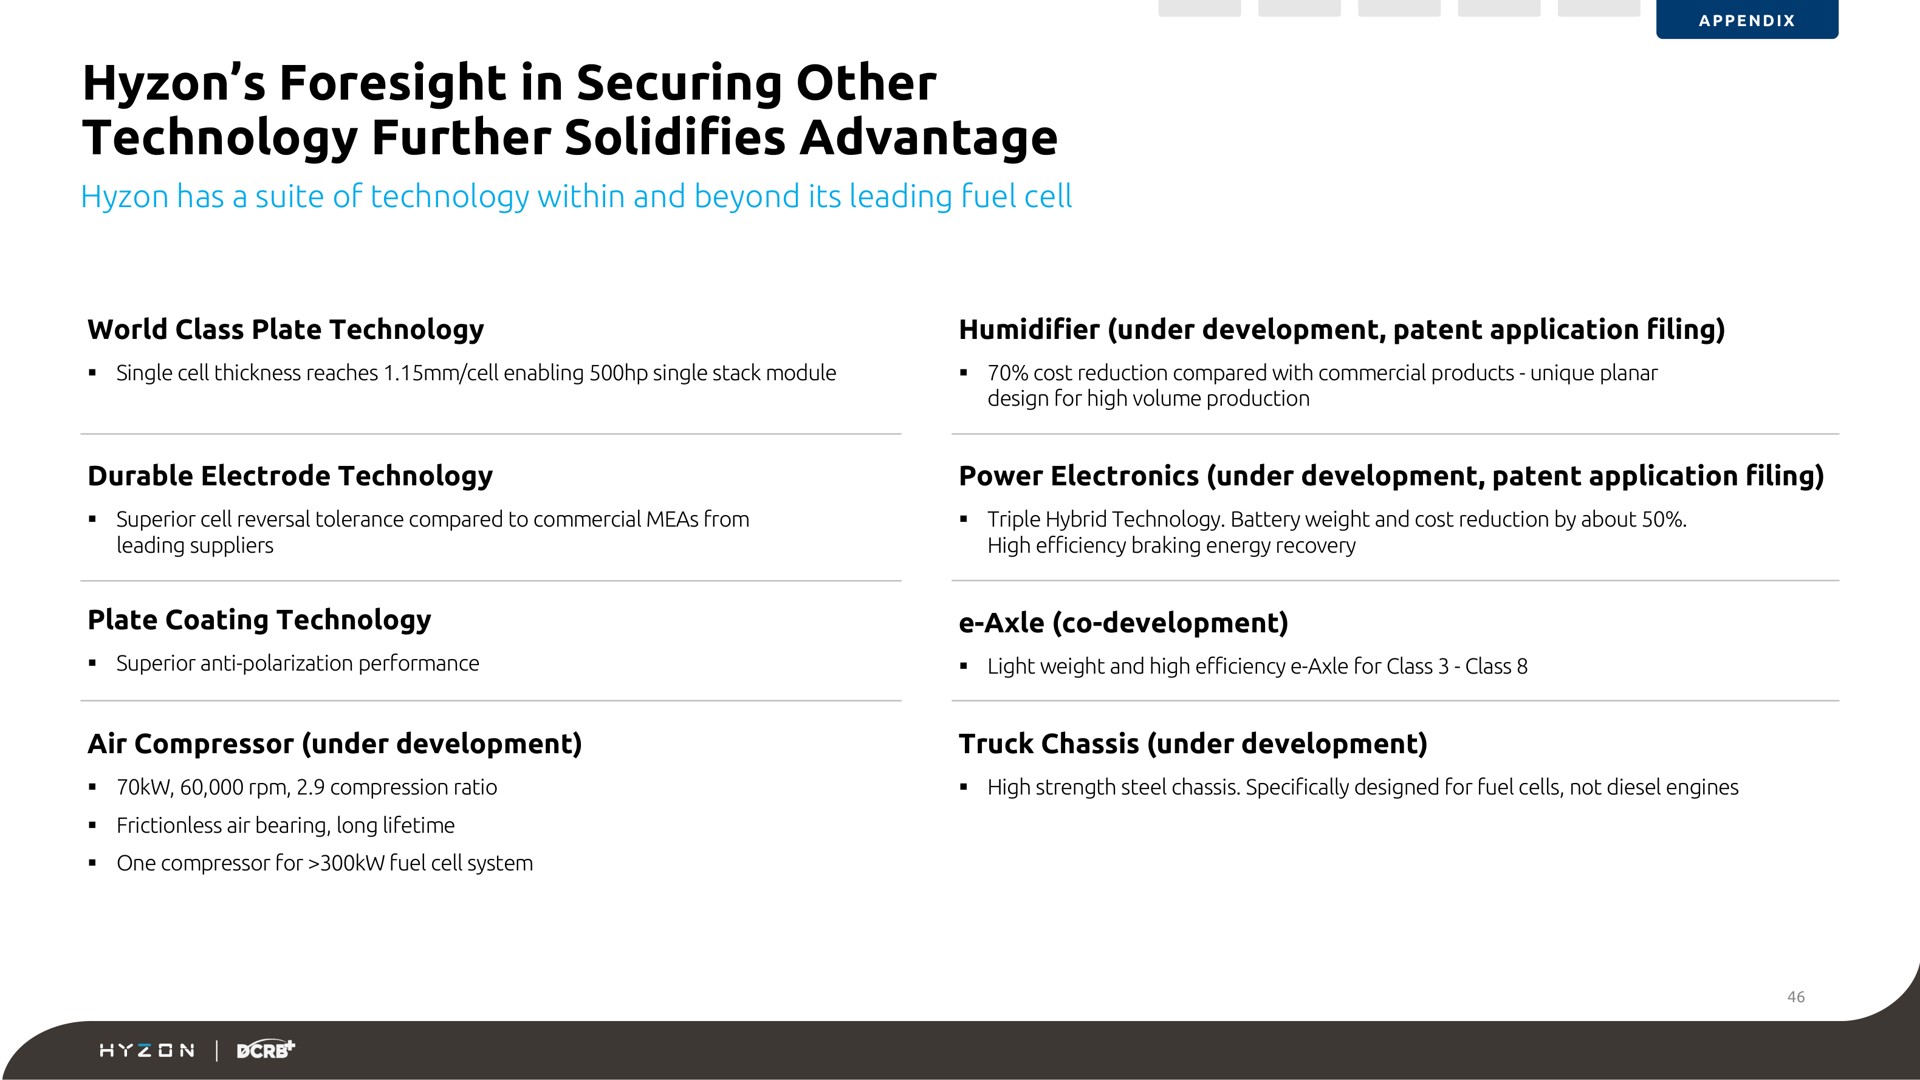 foresight in securing other technology further solidifies advantage | Hyzon